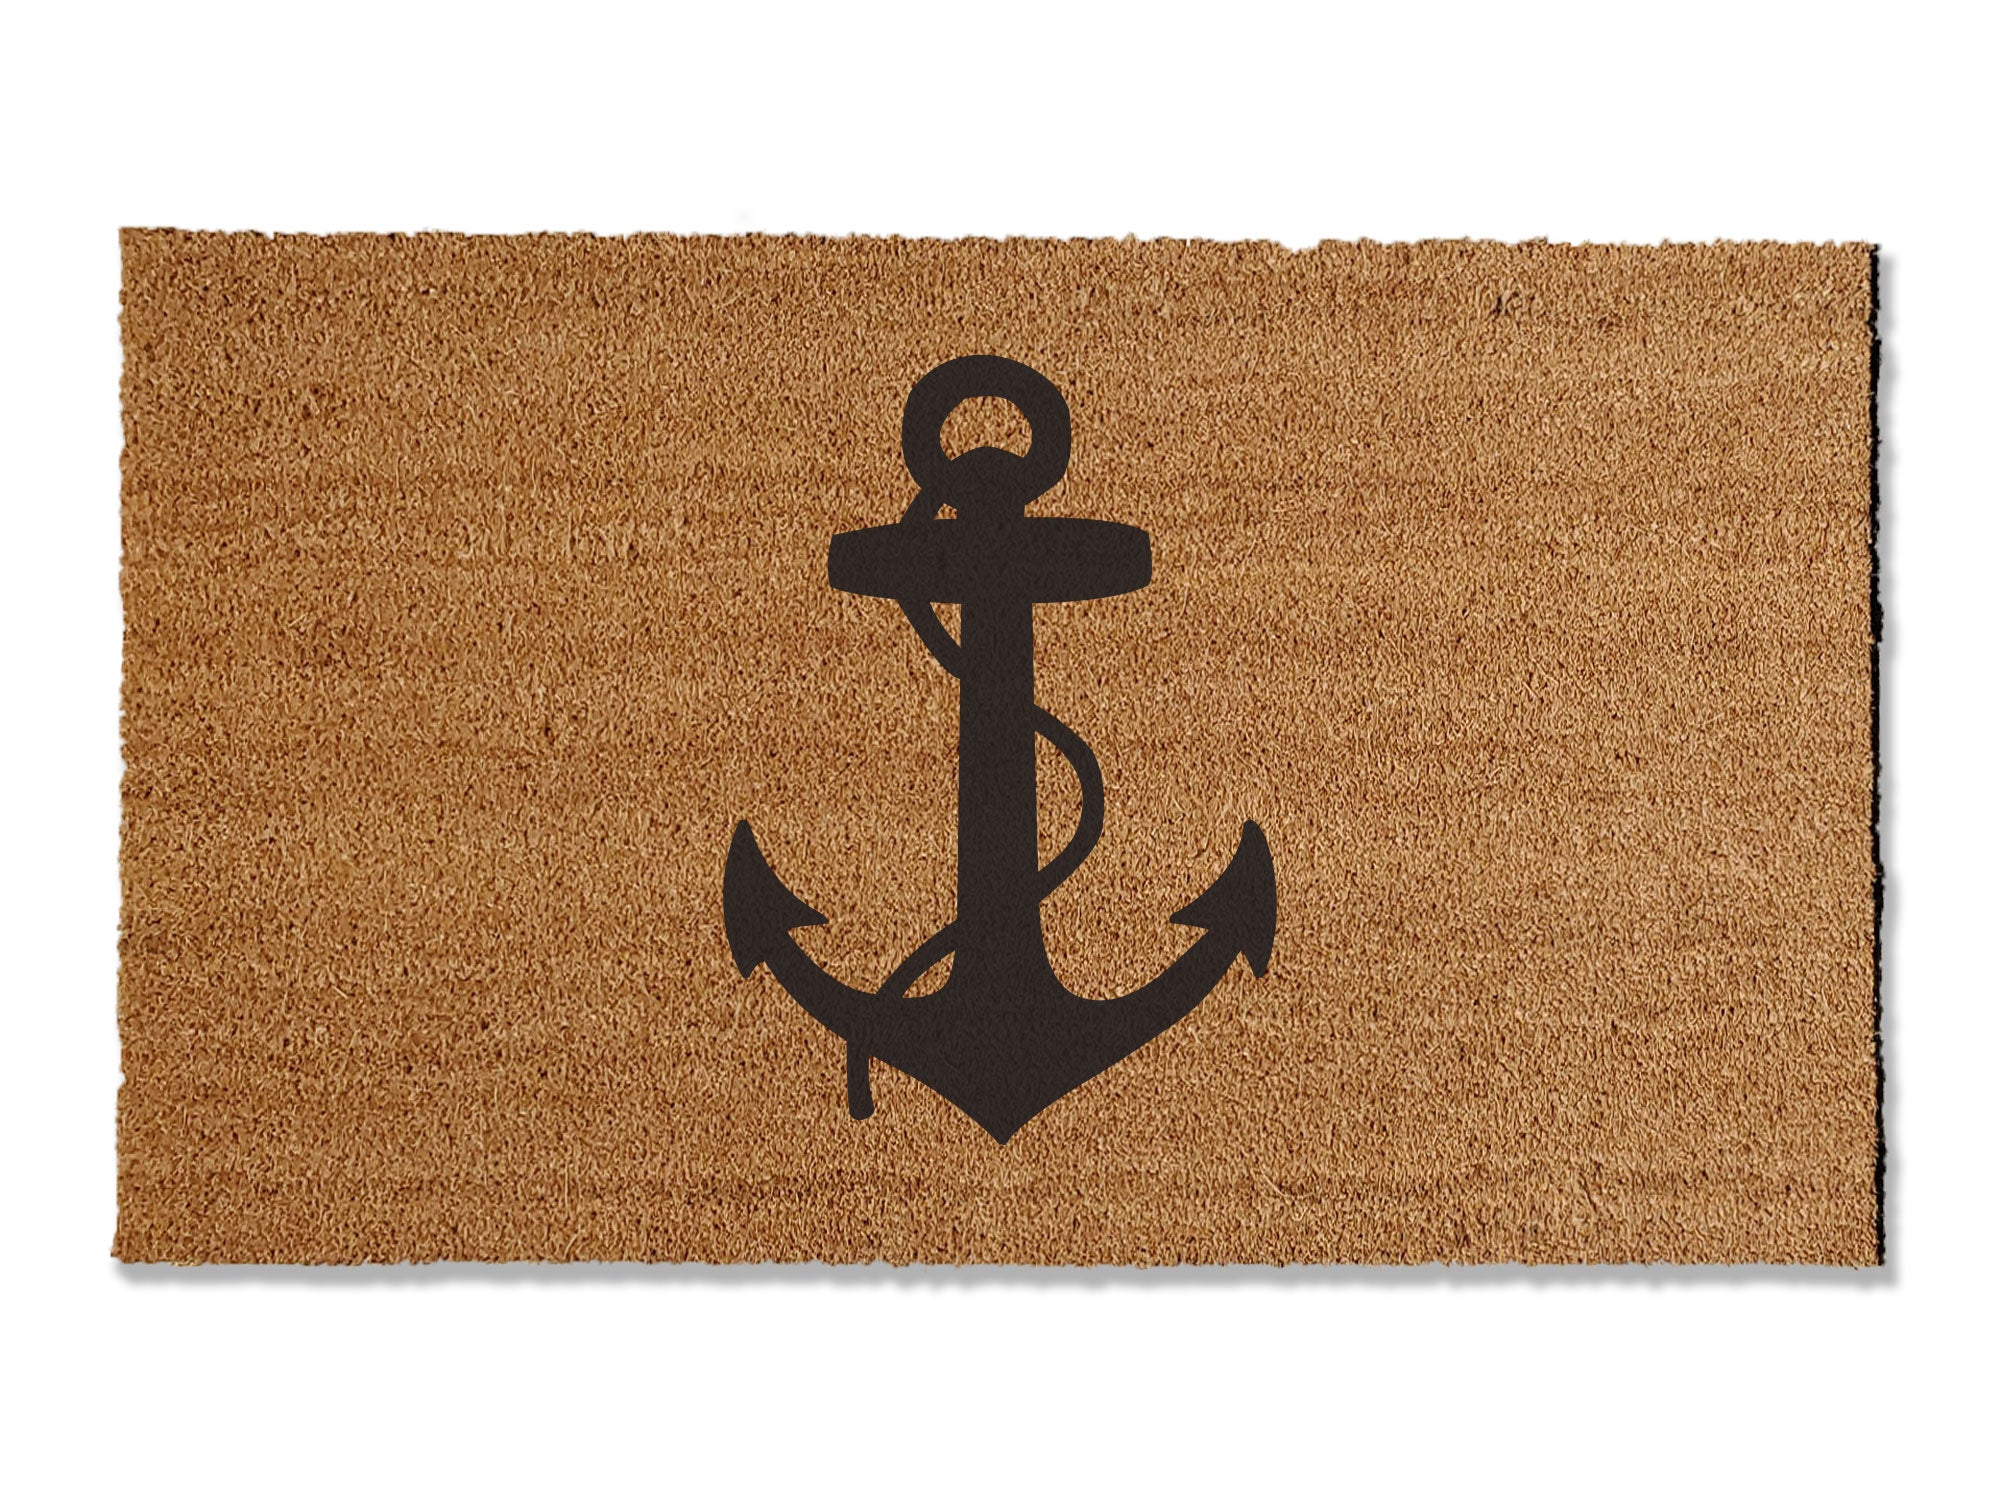 A coir doormat that is 36 inches by 60 inches and has a black anchor printed on it.